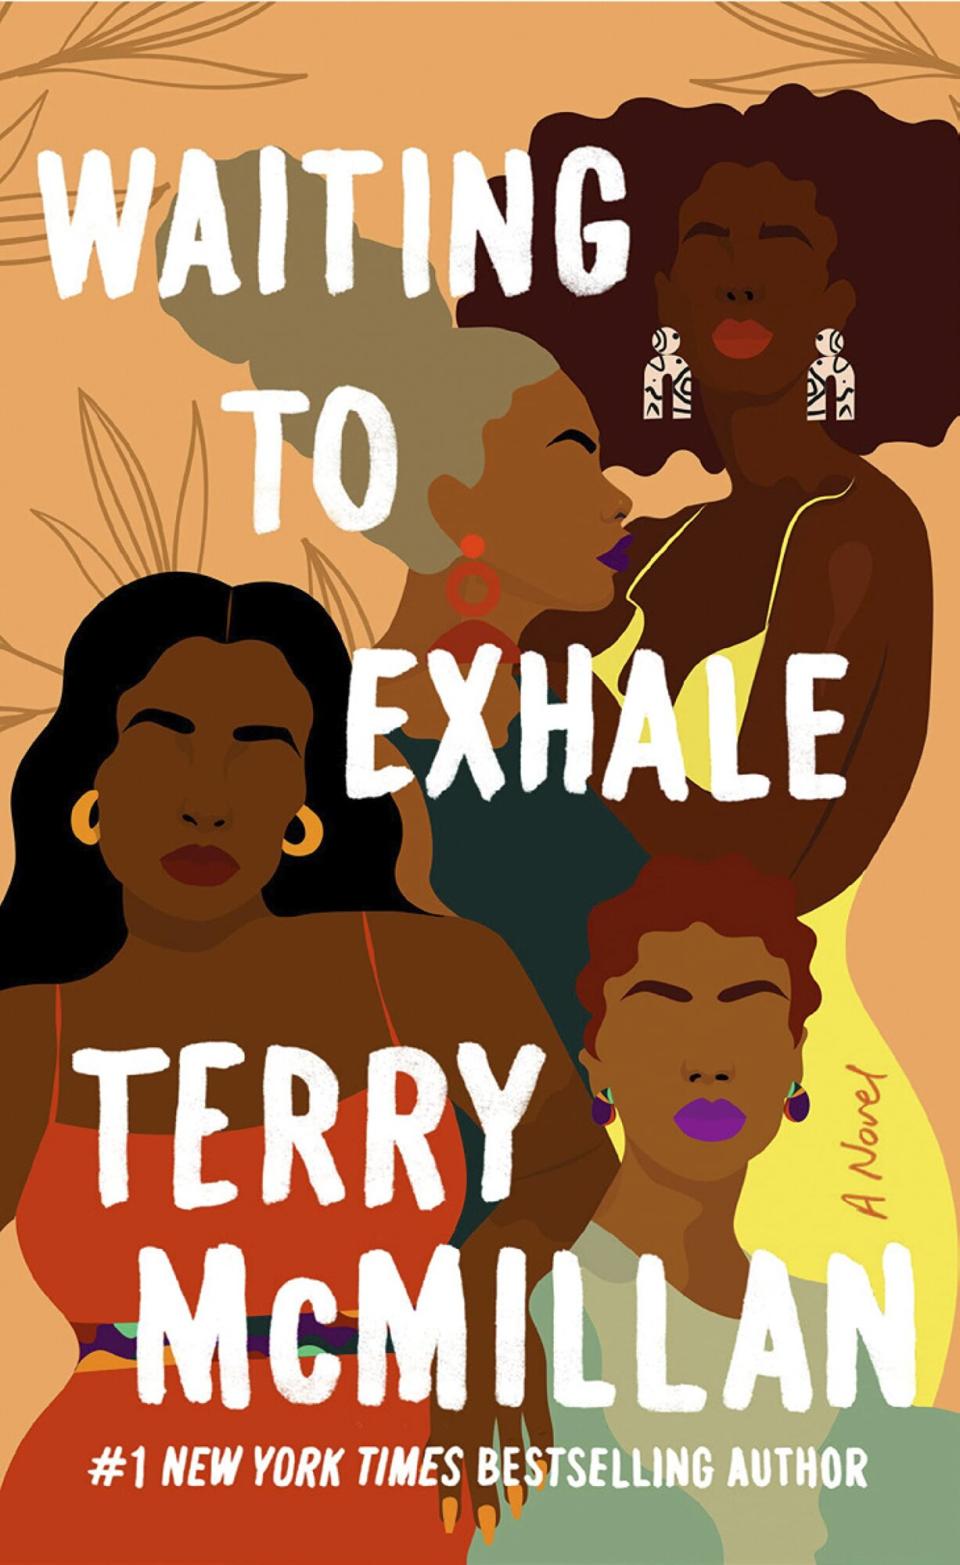 Waiting To Exhale by Terry McMillan